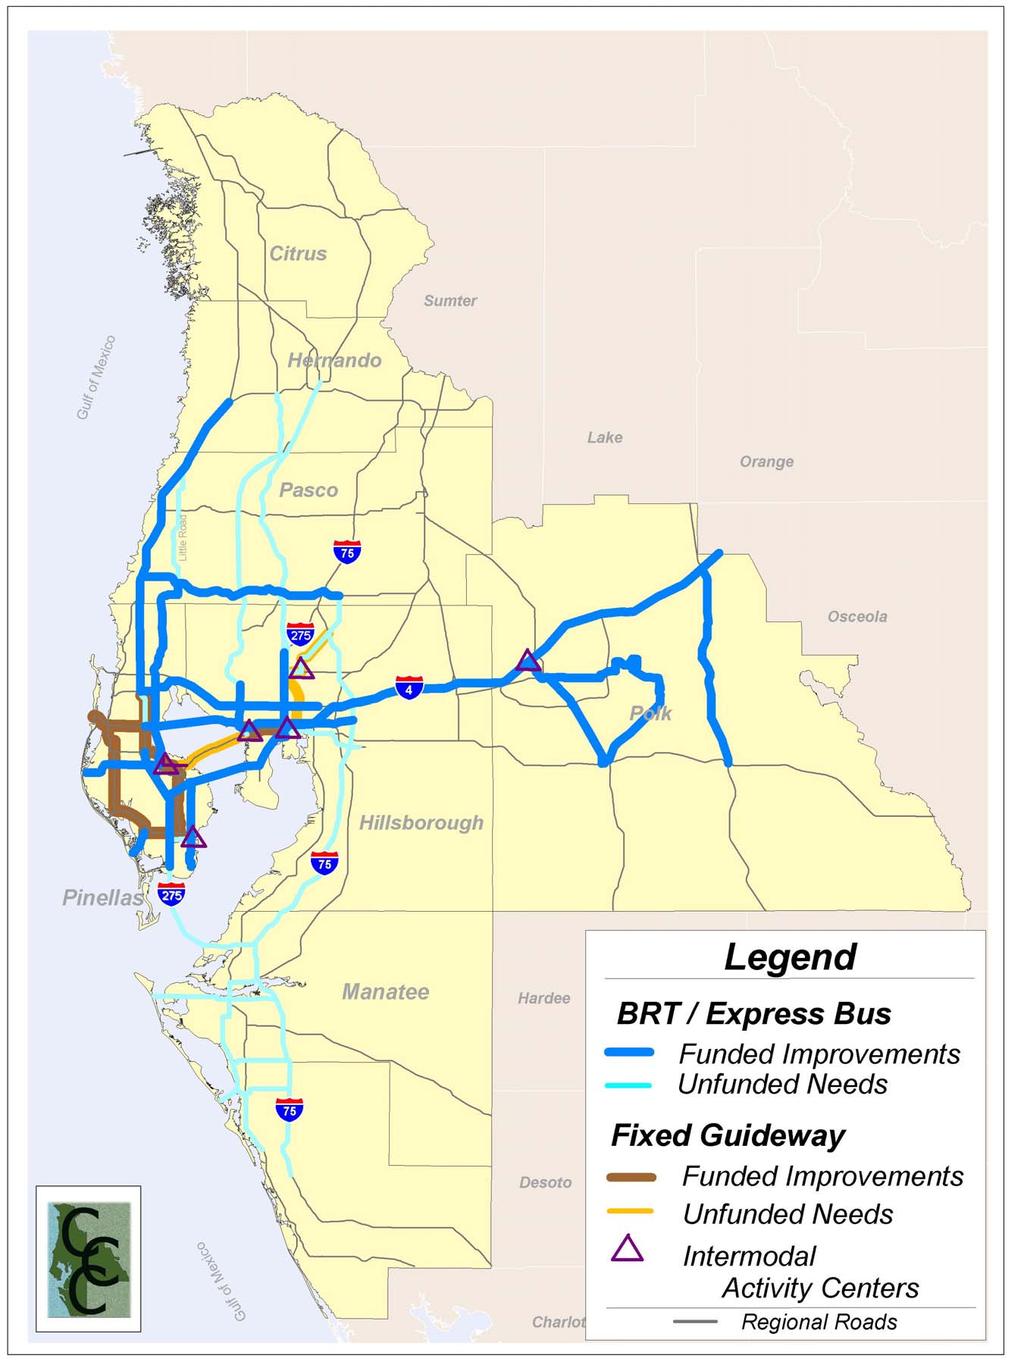 Figure 2 West Central Florida Needs Assessment and Cost Affordable Plan Notes: Intermodal centers may be funded in one or more of the activity centers shown on the map pending results of the current